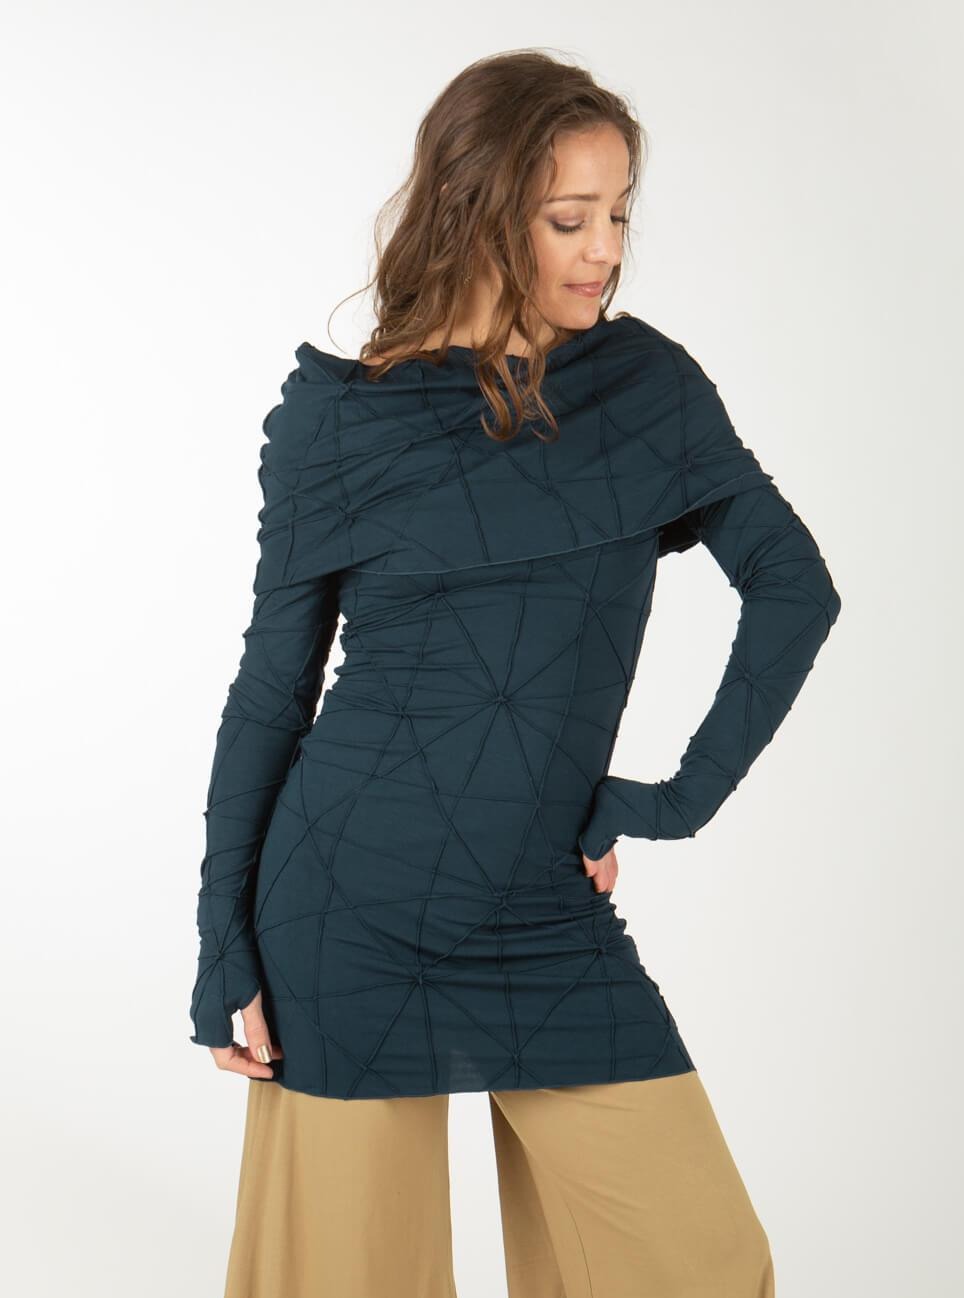 The Texture Cowl Tunic